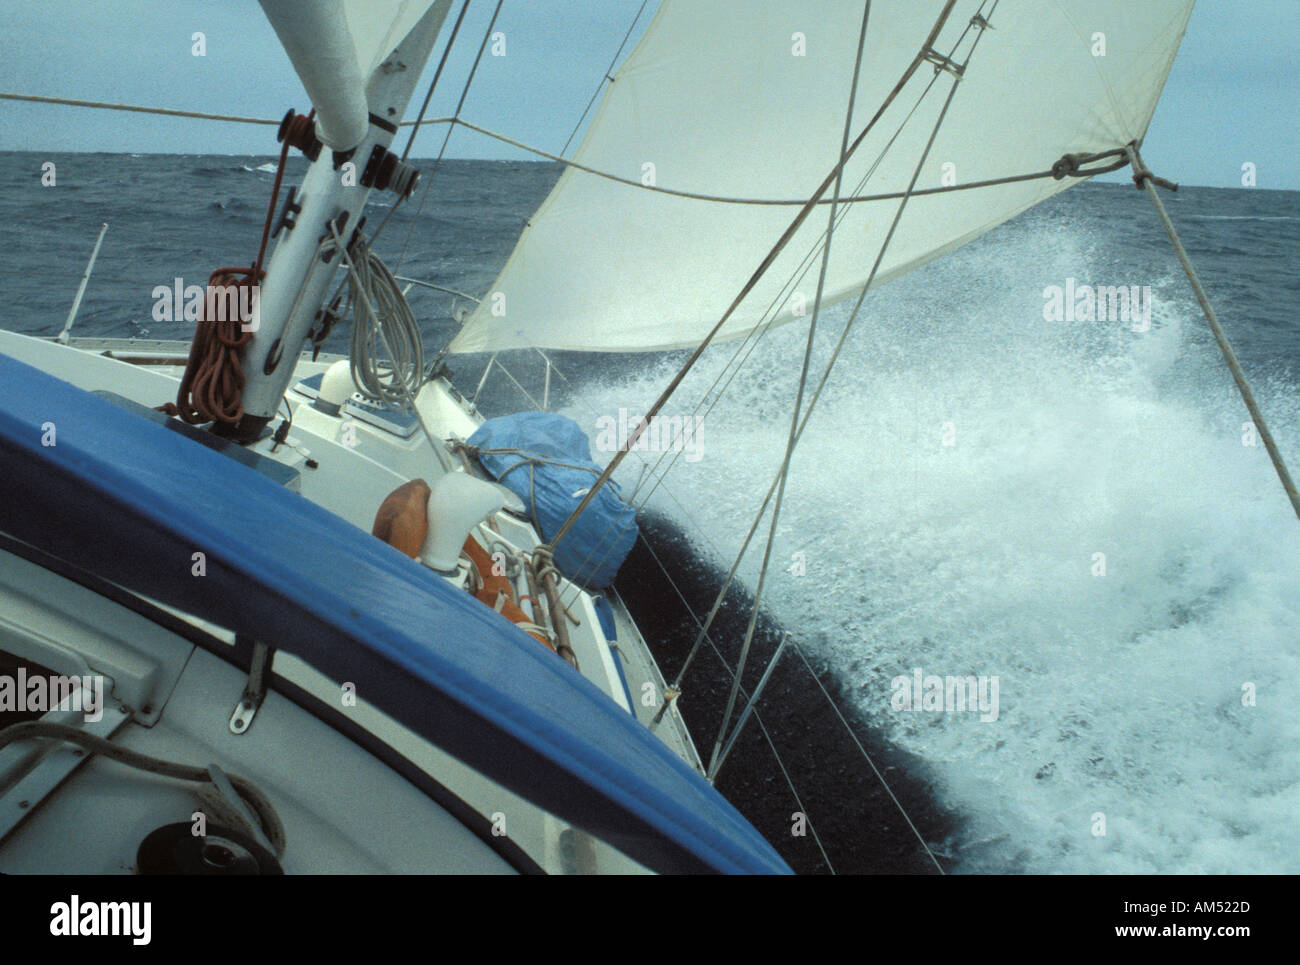 sailing in stormy conditions Stock Photo